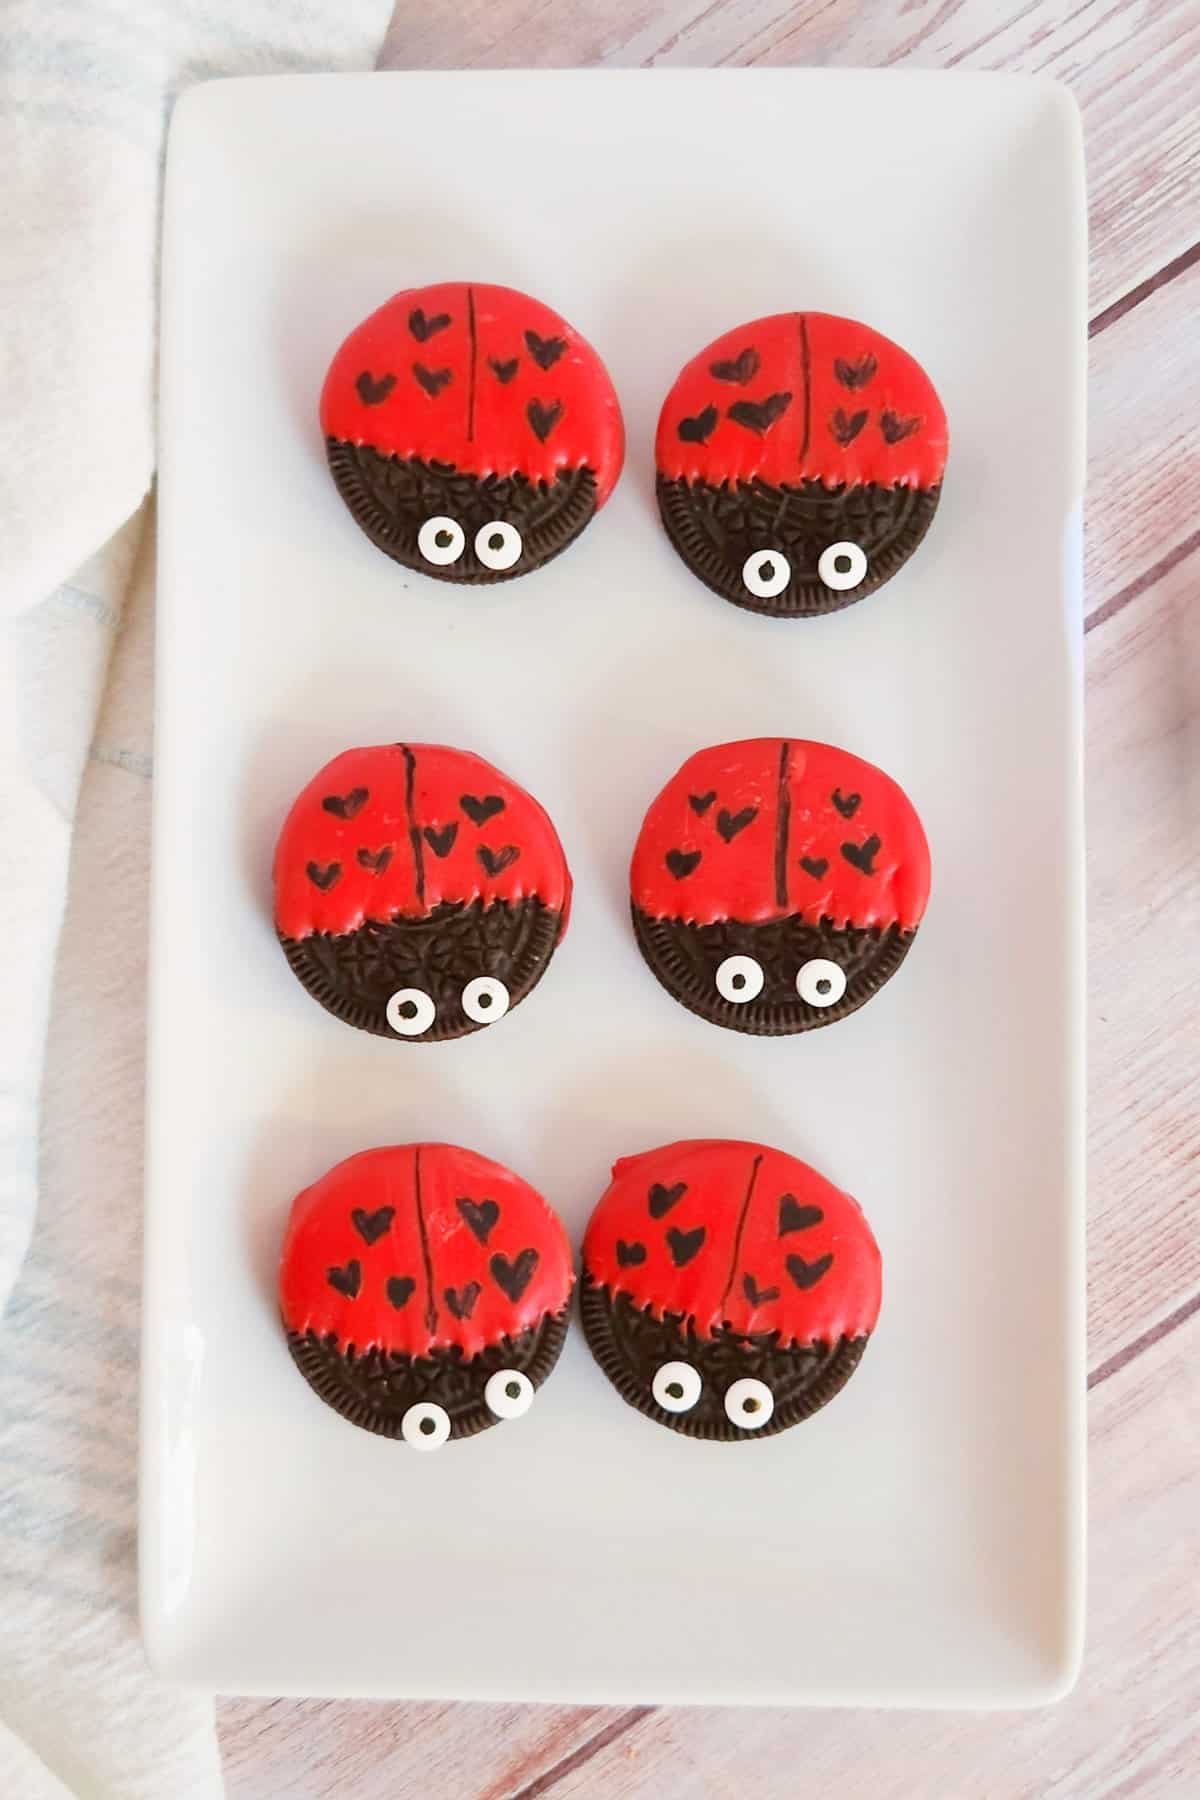 Oreo cookies dipped in red chocolate and decorated  to look like ladybugs with heart spots for Valentine's Day.